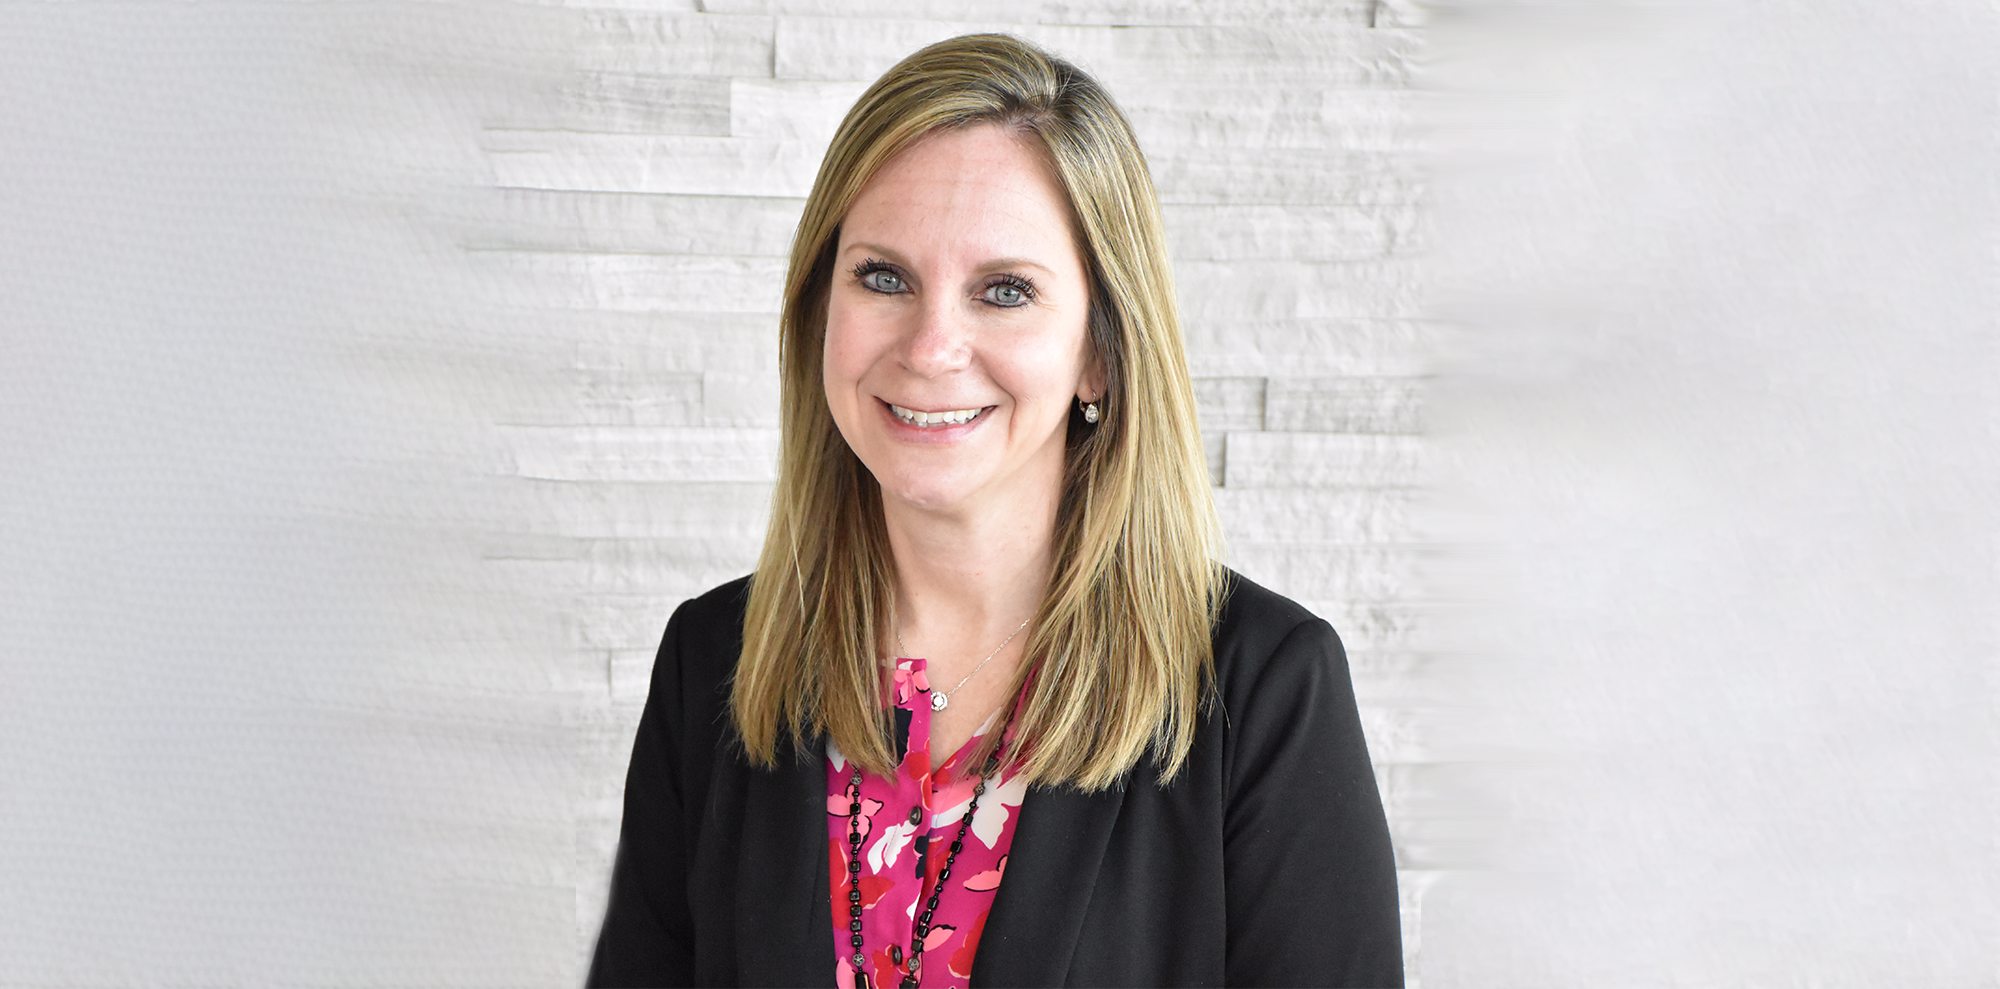 Jennifer Troxell, CAC, CRCR, Named Director of Patient Financial Services at Evangelical